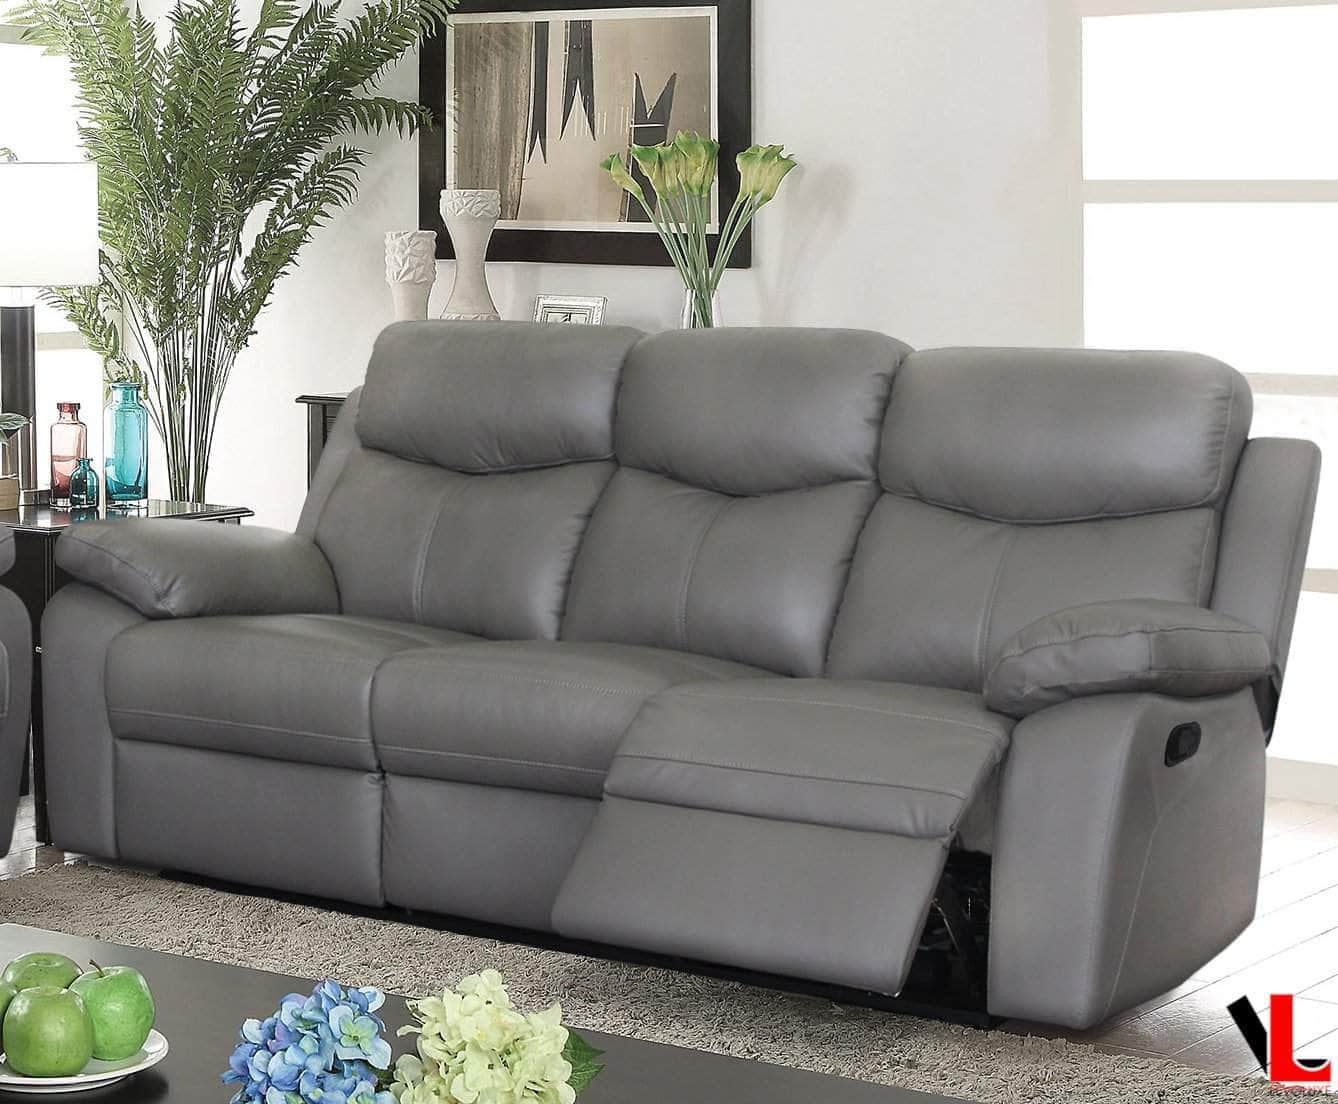 Pending - Levoluxe Grey Aveon 83" Pillow Top Arm Reclining Sofa in Leather Match - Available in 2 Colours